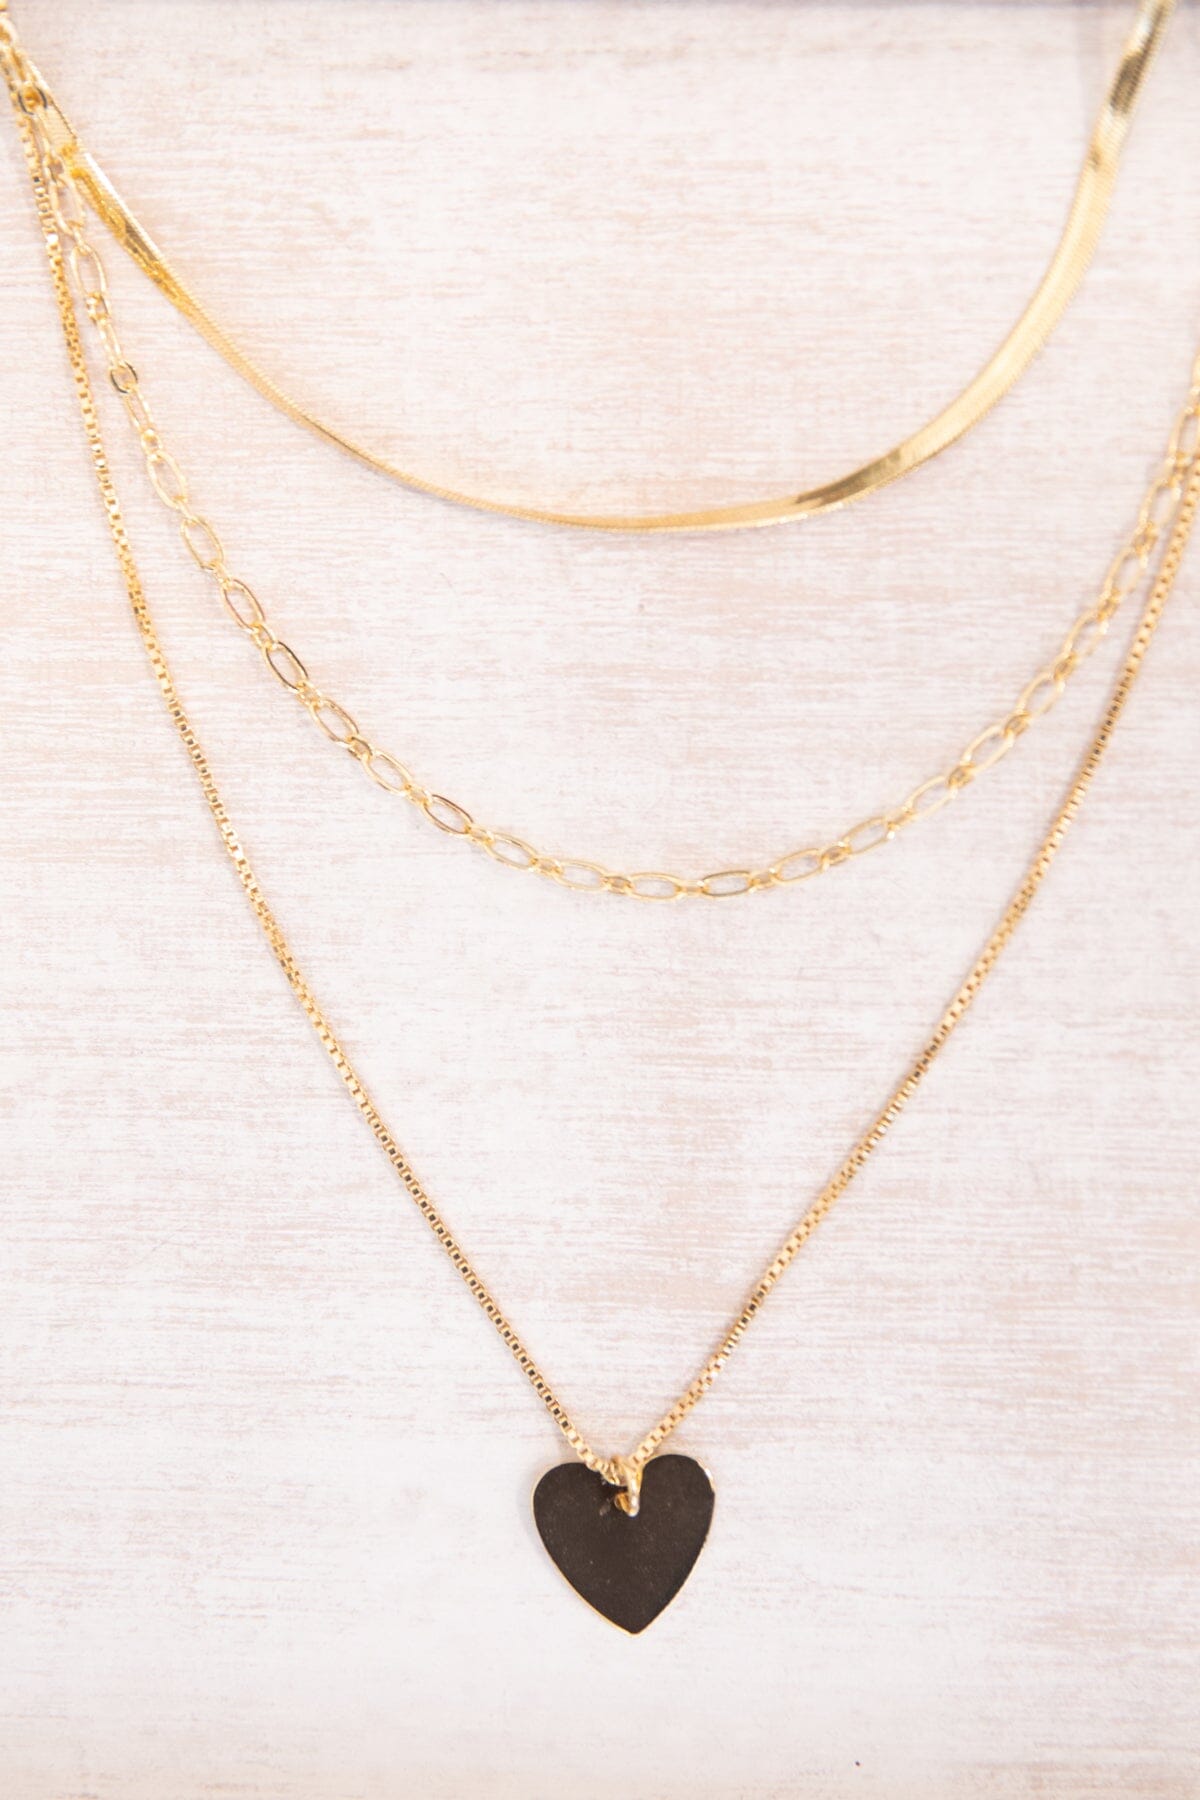 Gold Multichain Heart Charm Necklace - Filly Flair